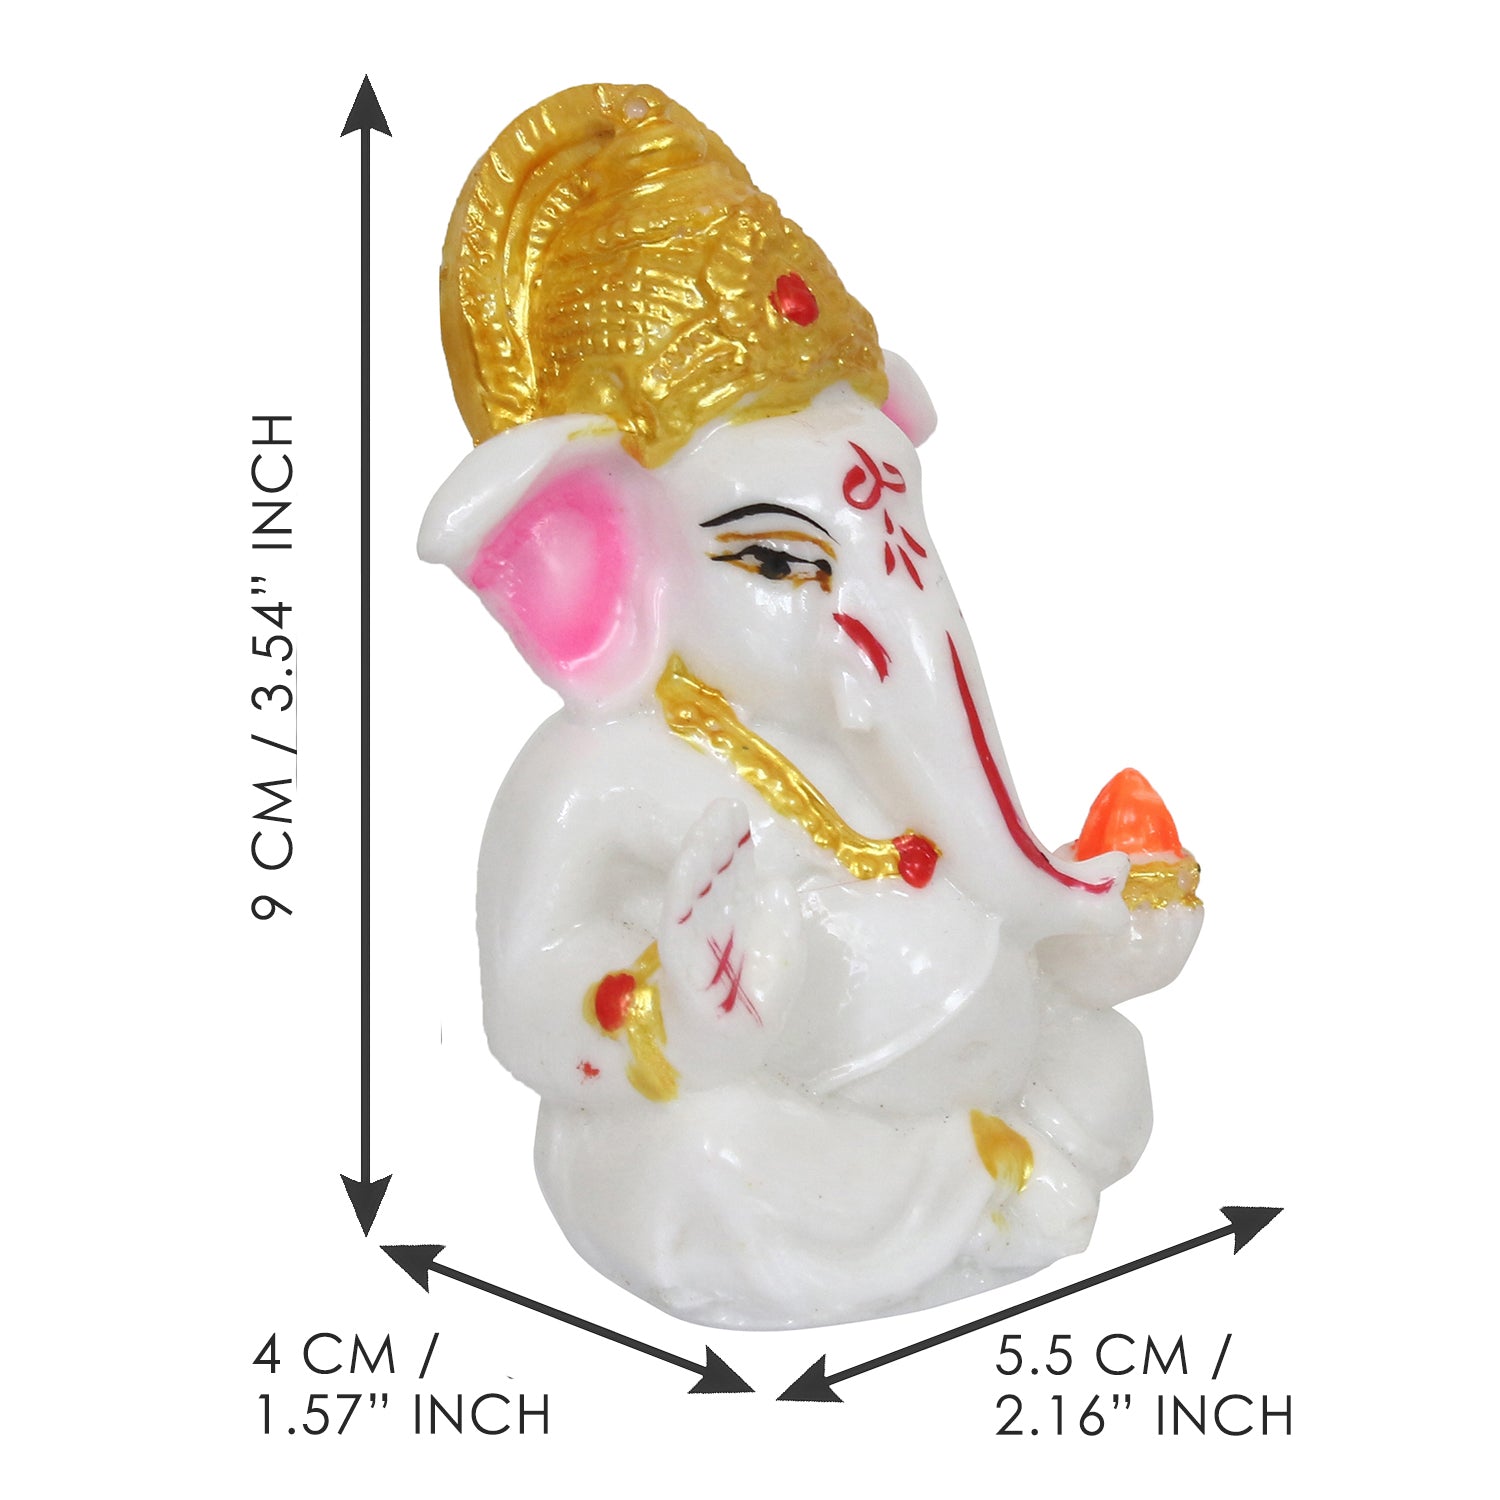 Decorative Lord Ganesha Idol for Car Dashboard, Home Temple and Office Desks 3